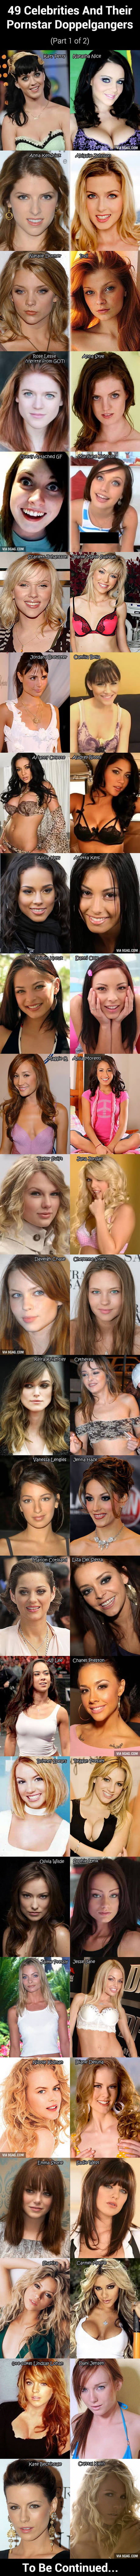 460px x 8462px - 49 Celebrities And Their Pornstar Doppelgangers (Part 1 of 2) - 9GAG